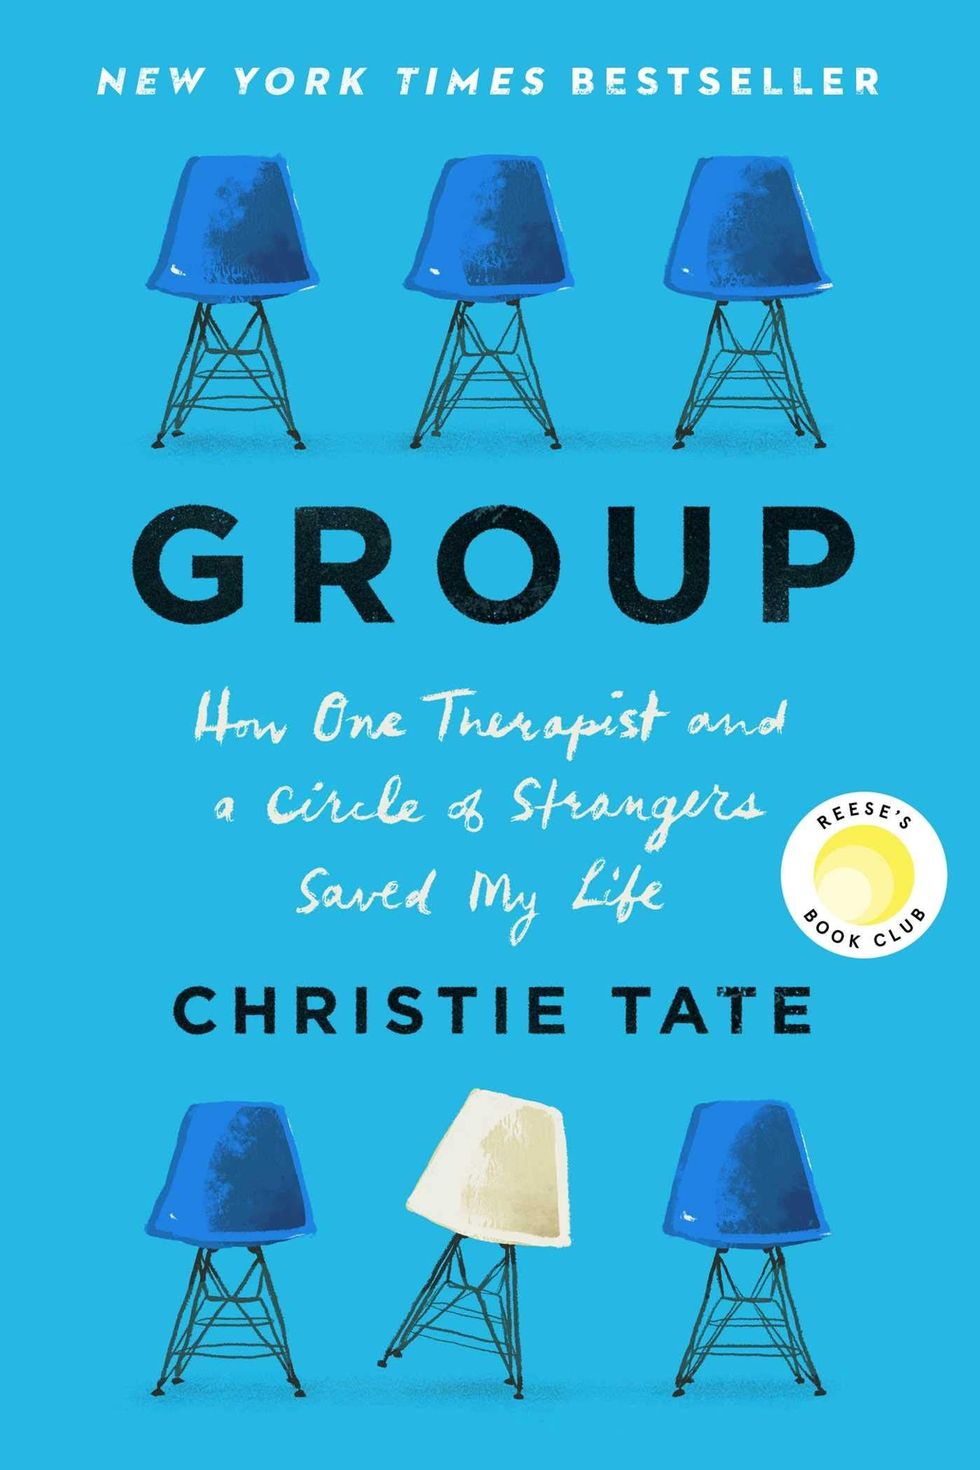 <i>Group: How One Therapist and a Circle of Strangers Saved My Life</i>, by Christie Tate